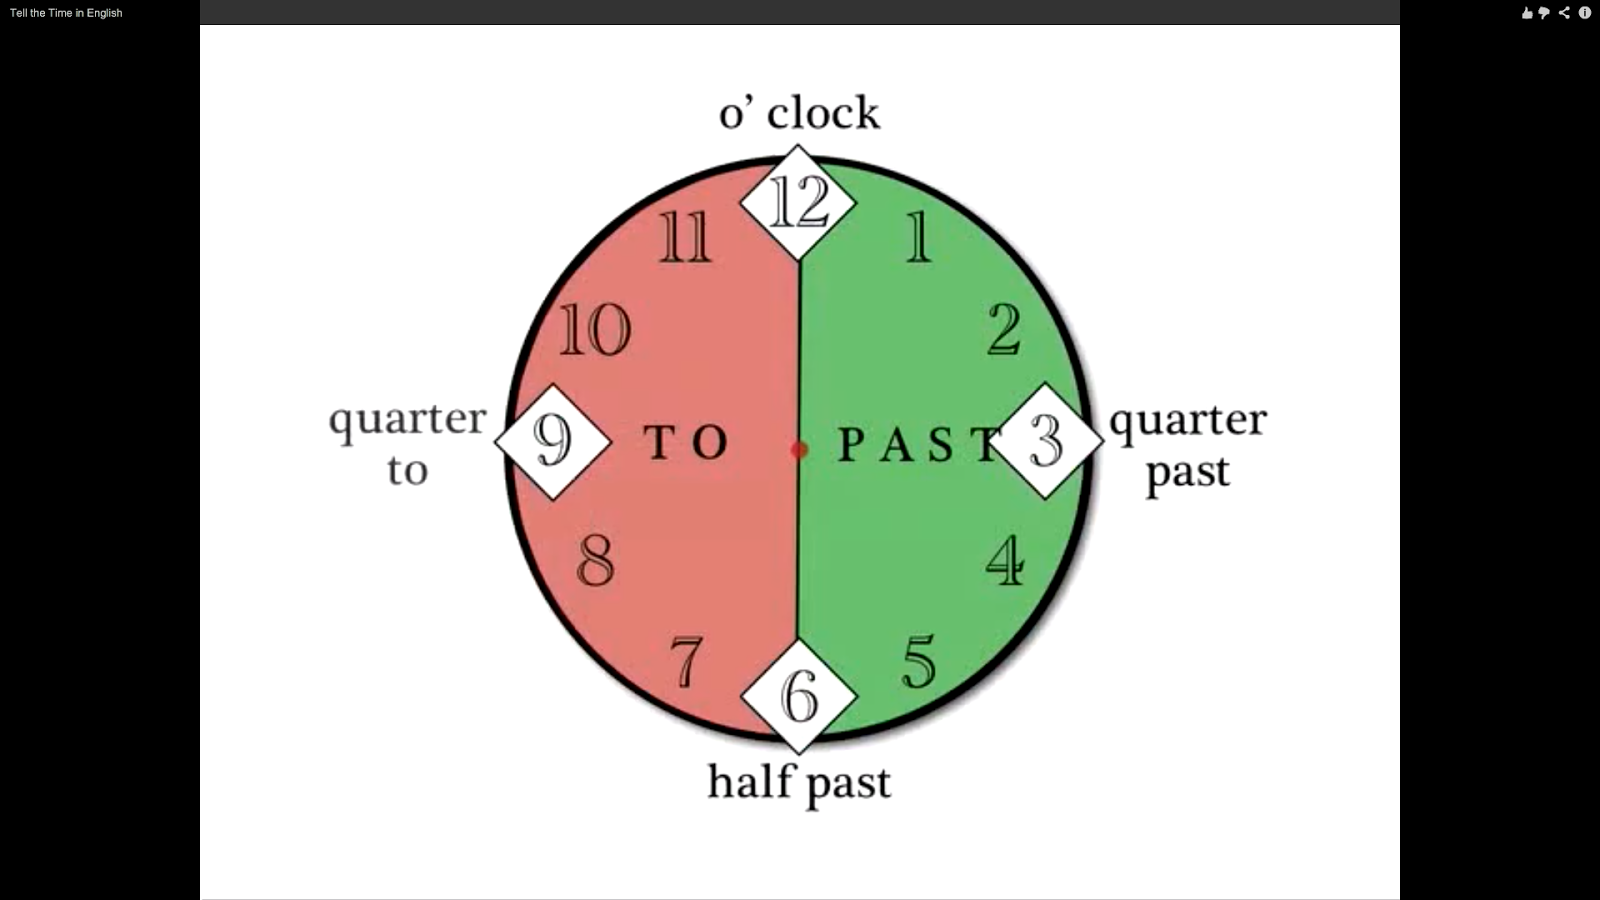 How to tell time. Часы на английском. Time in English. Telling the time in English. Clock time in English.